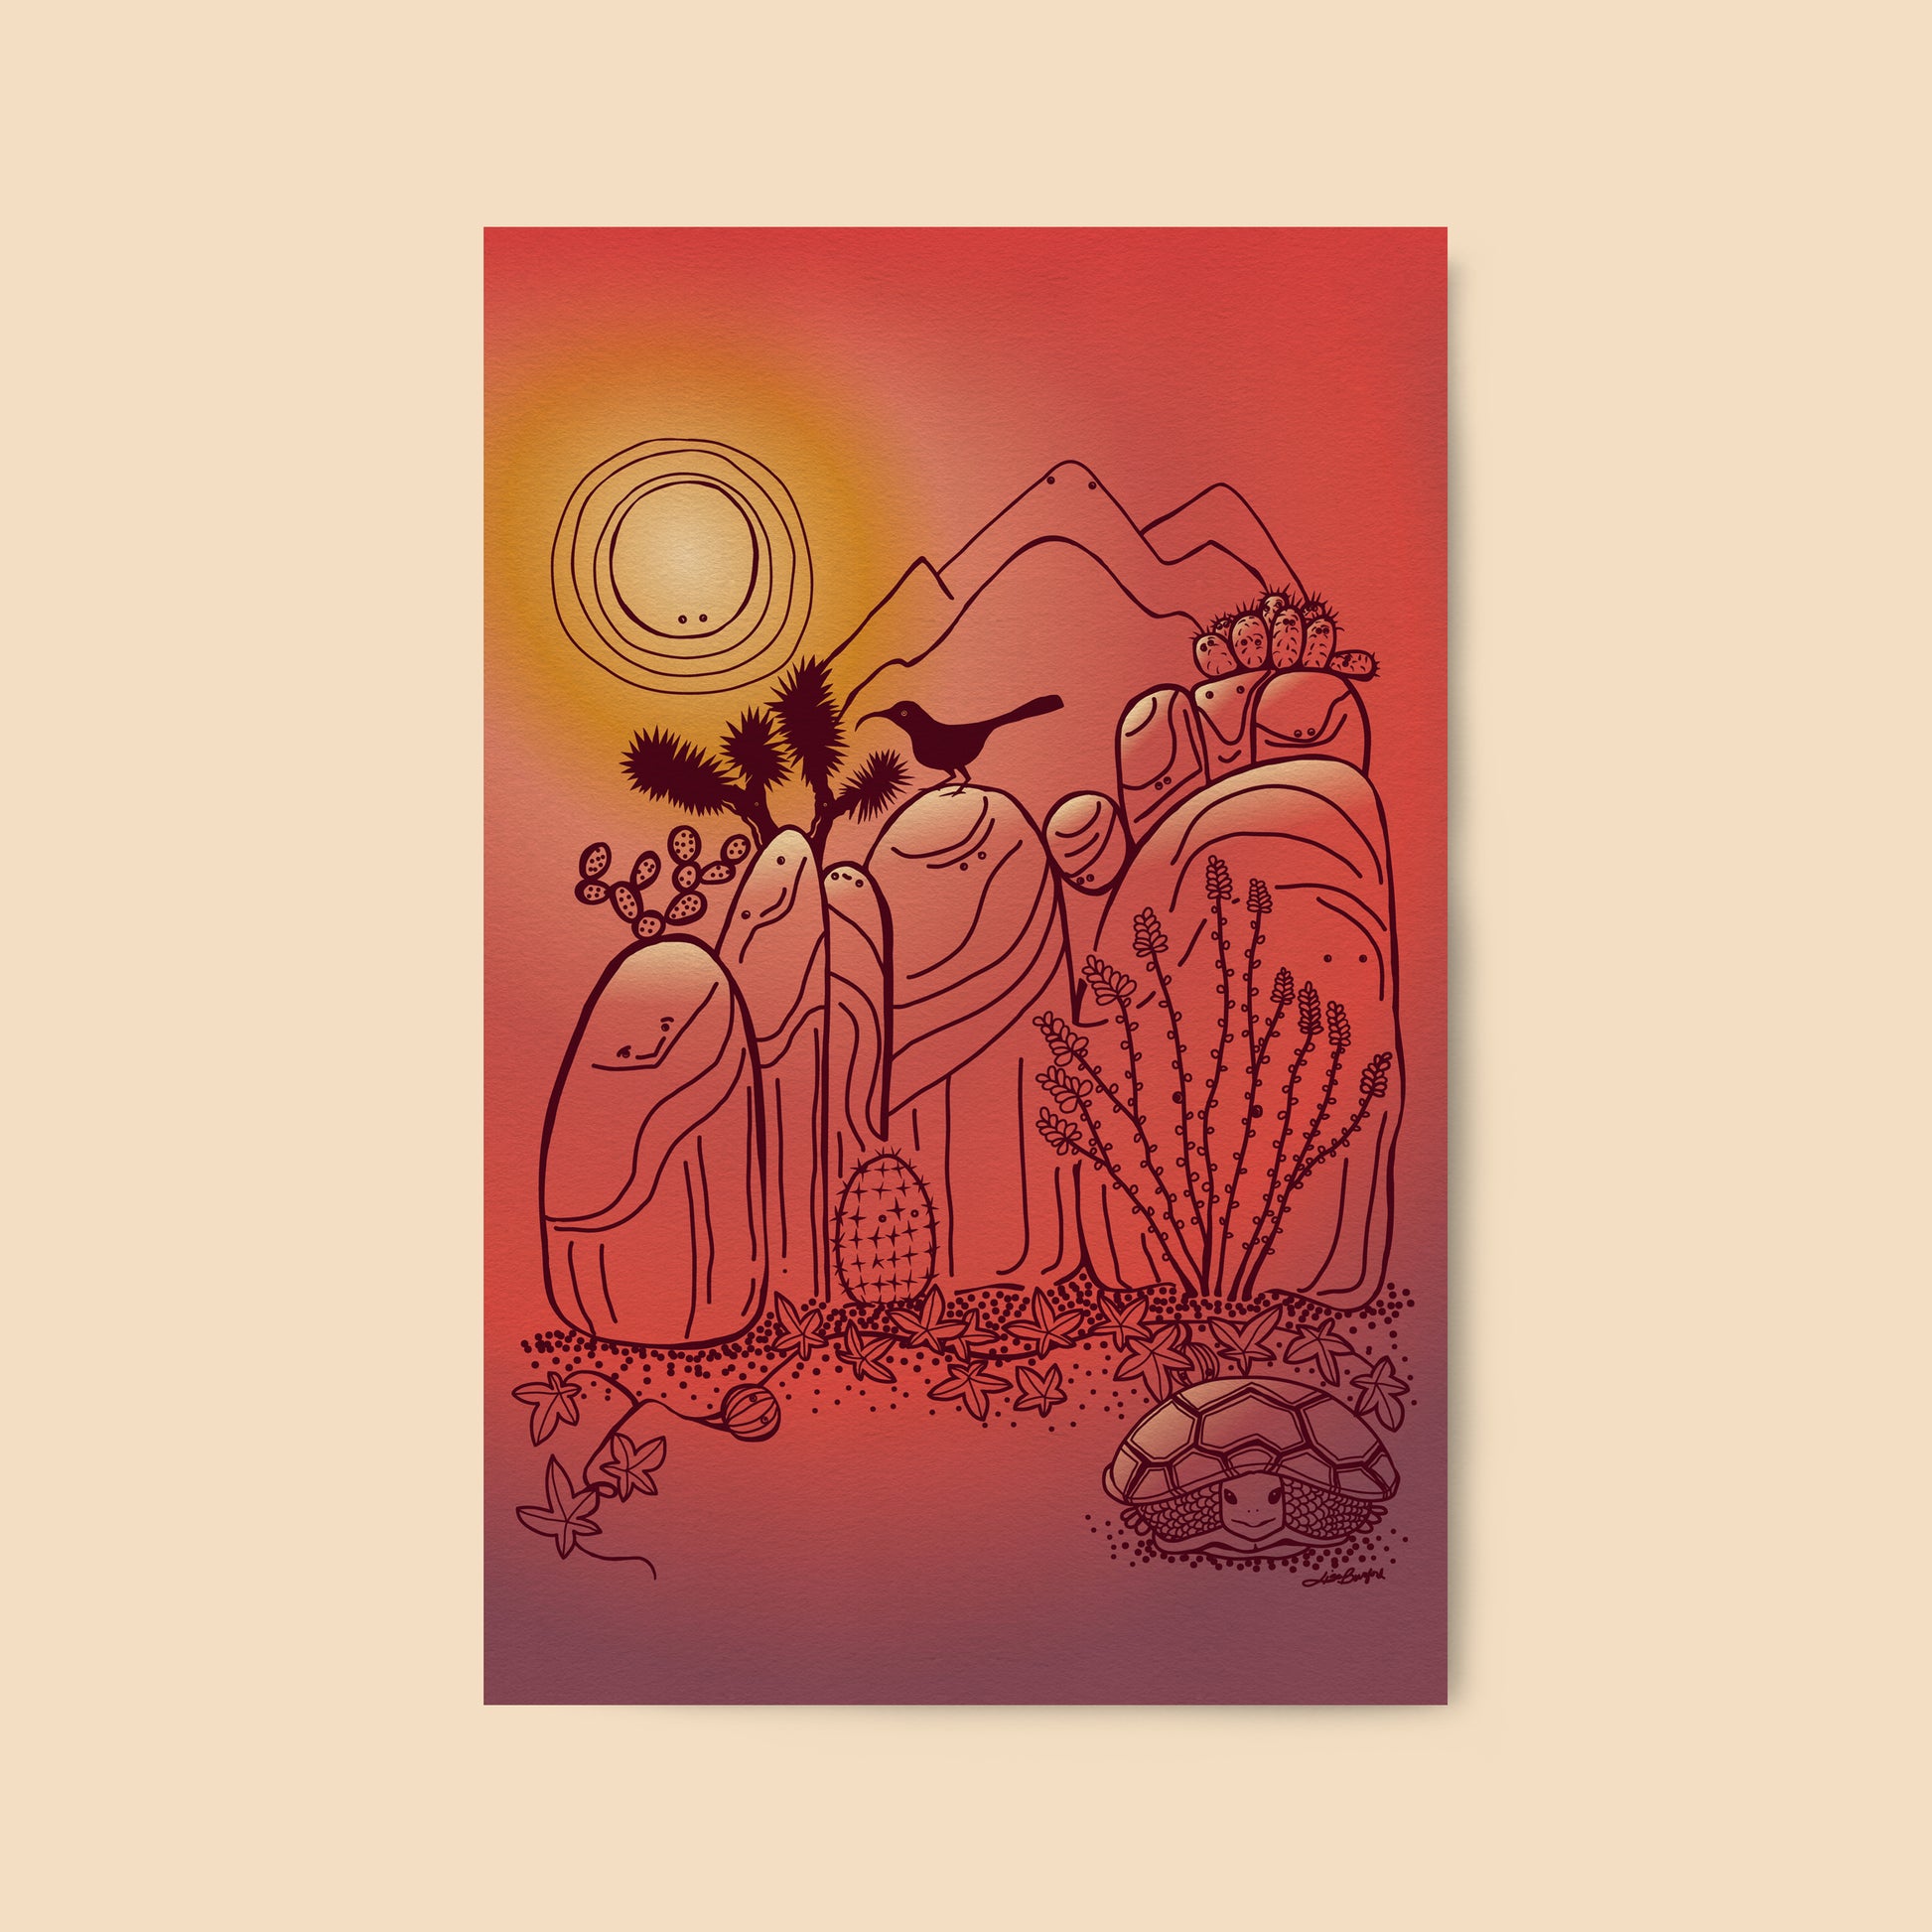 An illustrated print of Joshua Tree rocks and a few desert critters and plants. The rocks each have their own personality. Colors throughout resemble the beautiful desert sunsets. The print lays on a separate cream colored background.